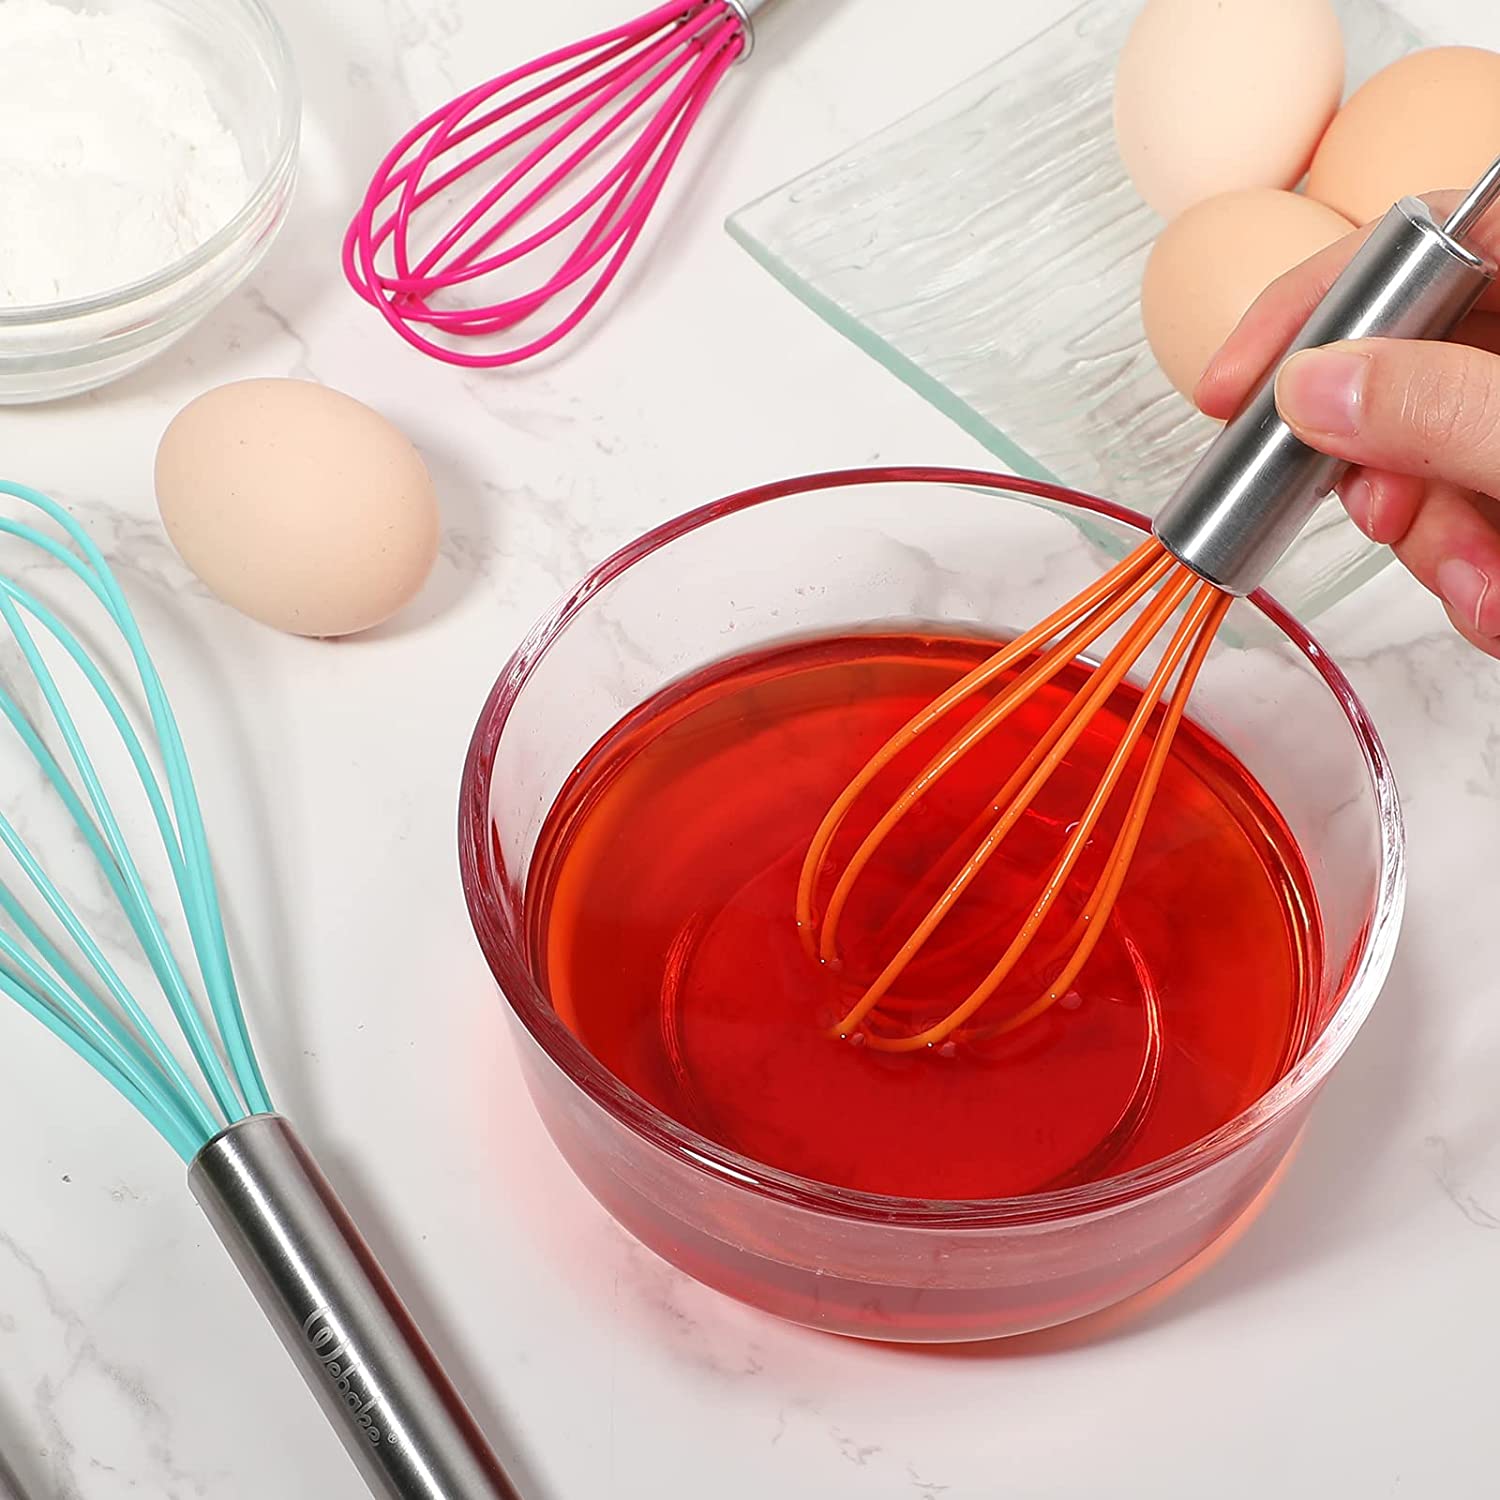 Webake Stainless Steel Small Whisks Tiny Cooking Balloon Wire Whisk (S